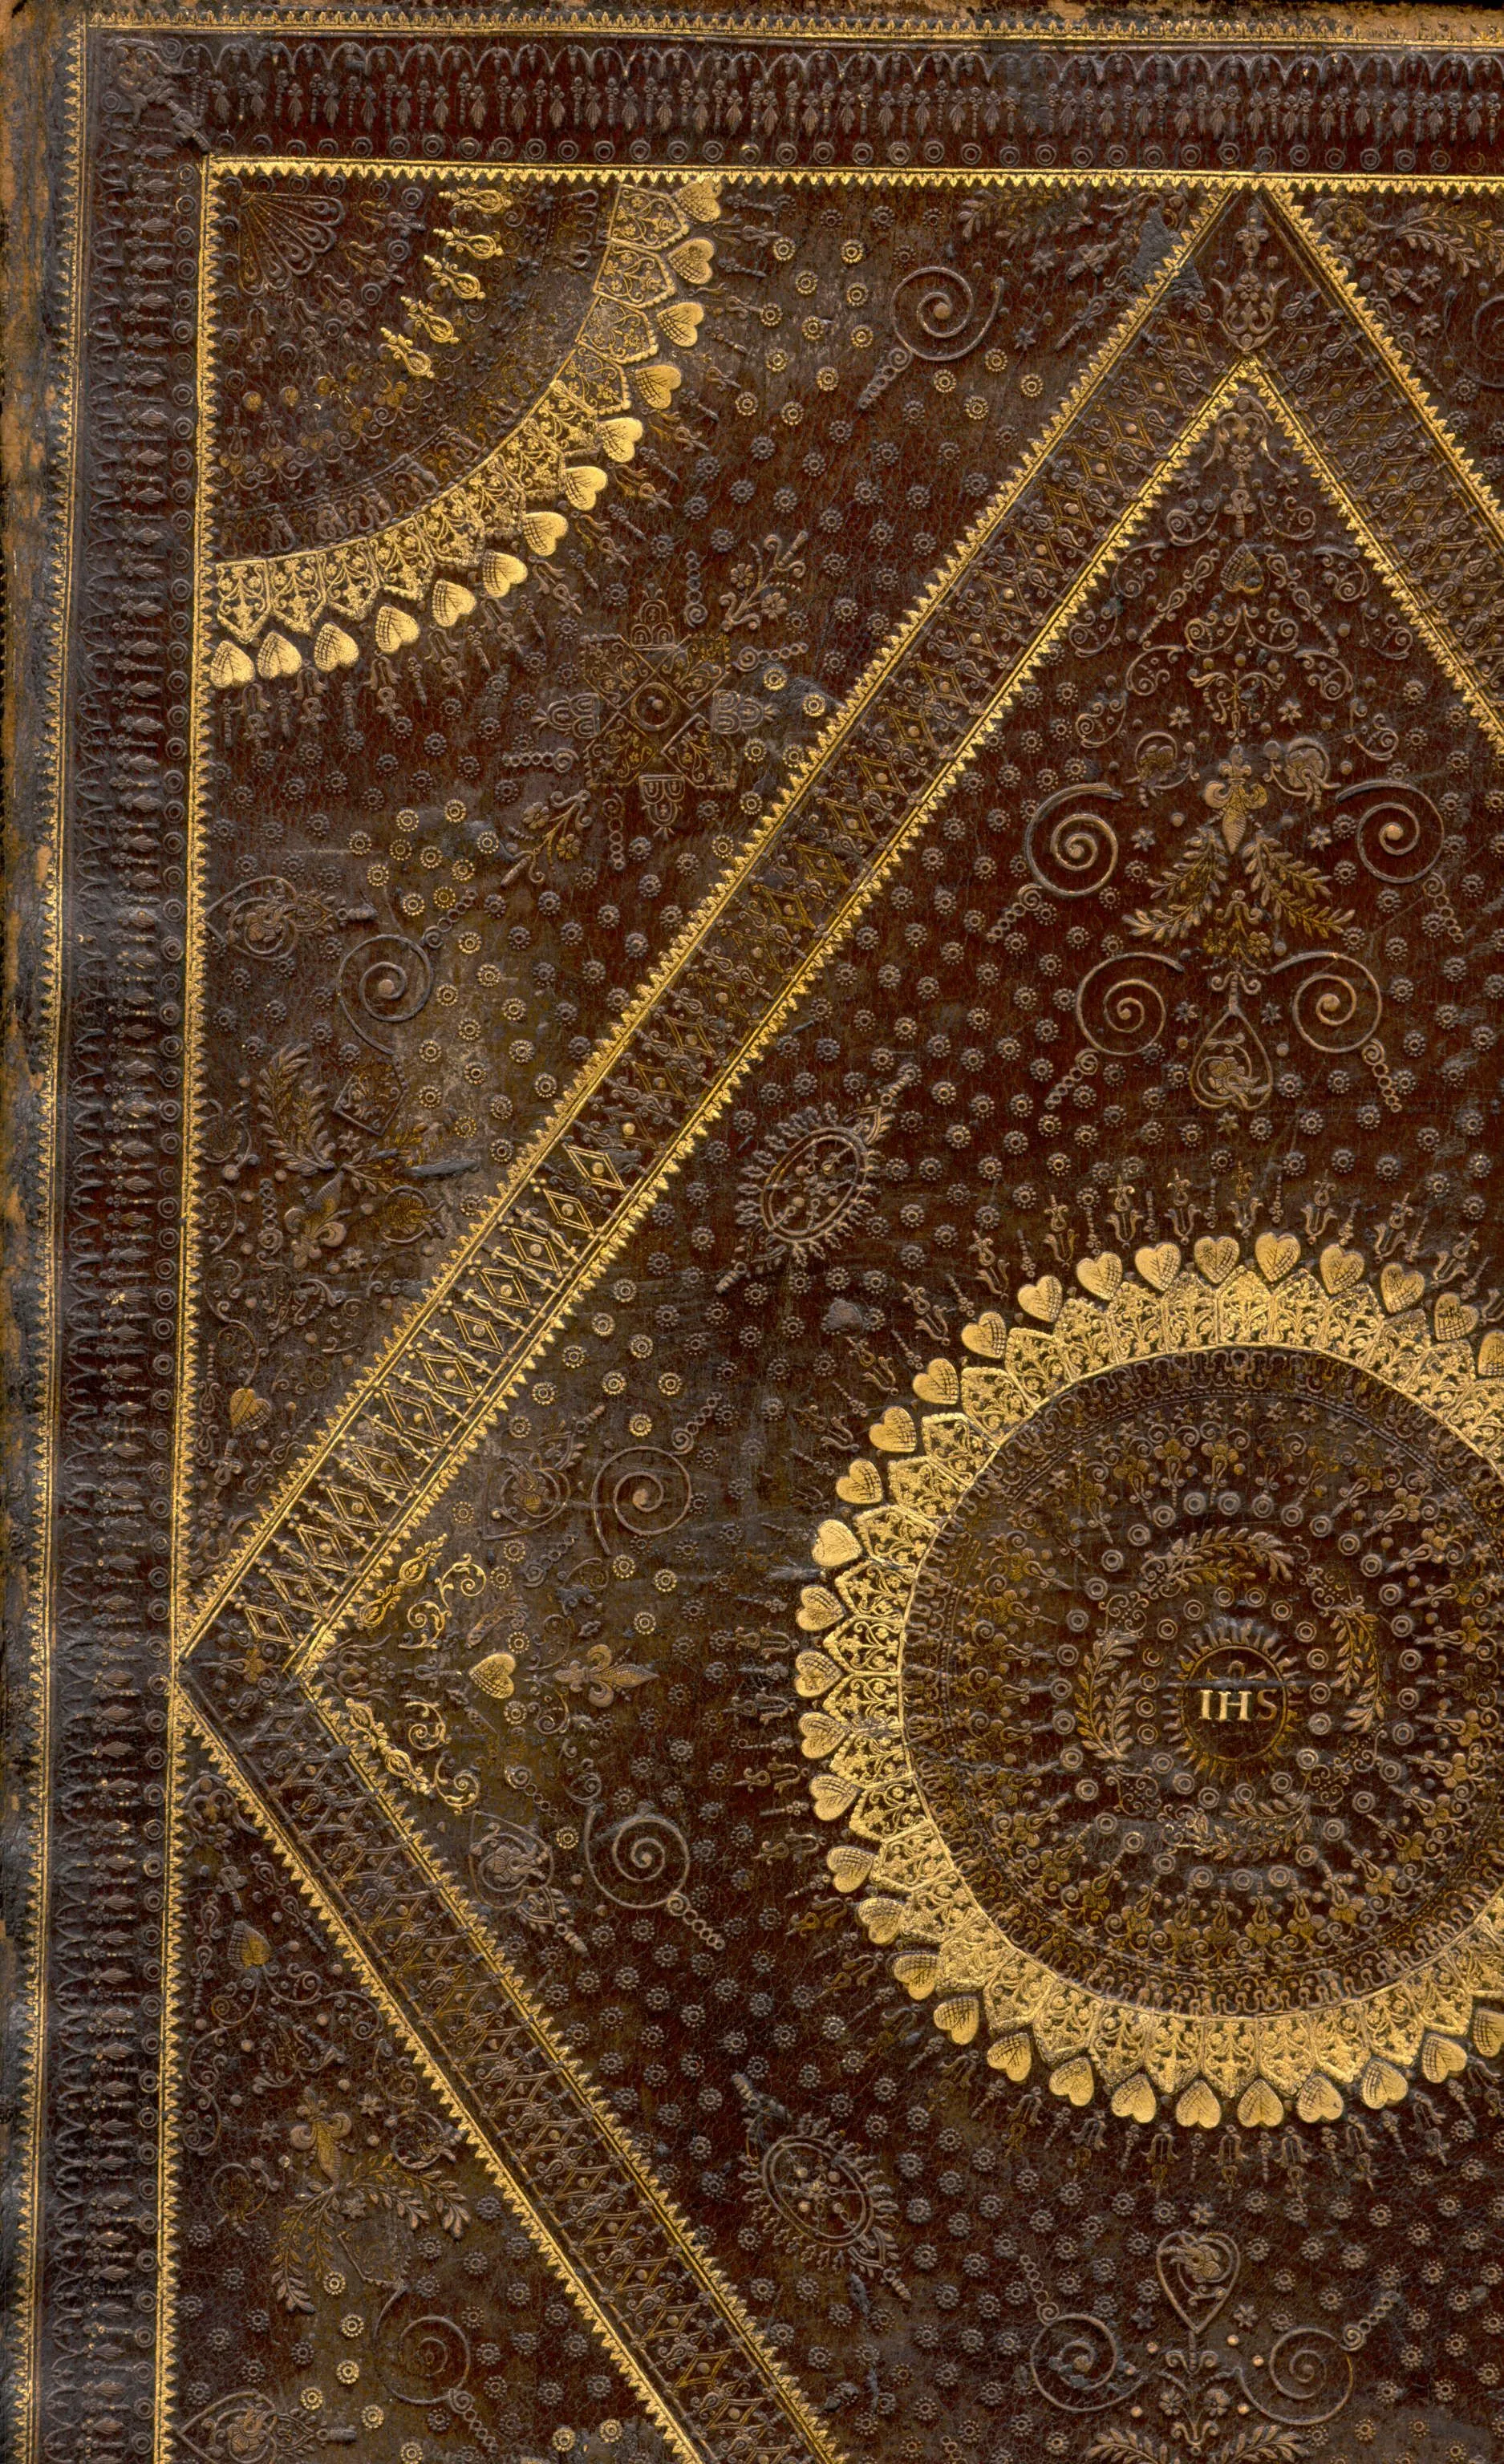 Photo showing: Style: All over design|Cambridge small motifs|Presentation|Religious, IHS initials; Caption: Upper cover; Colour: Brown; Edge: Gilt